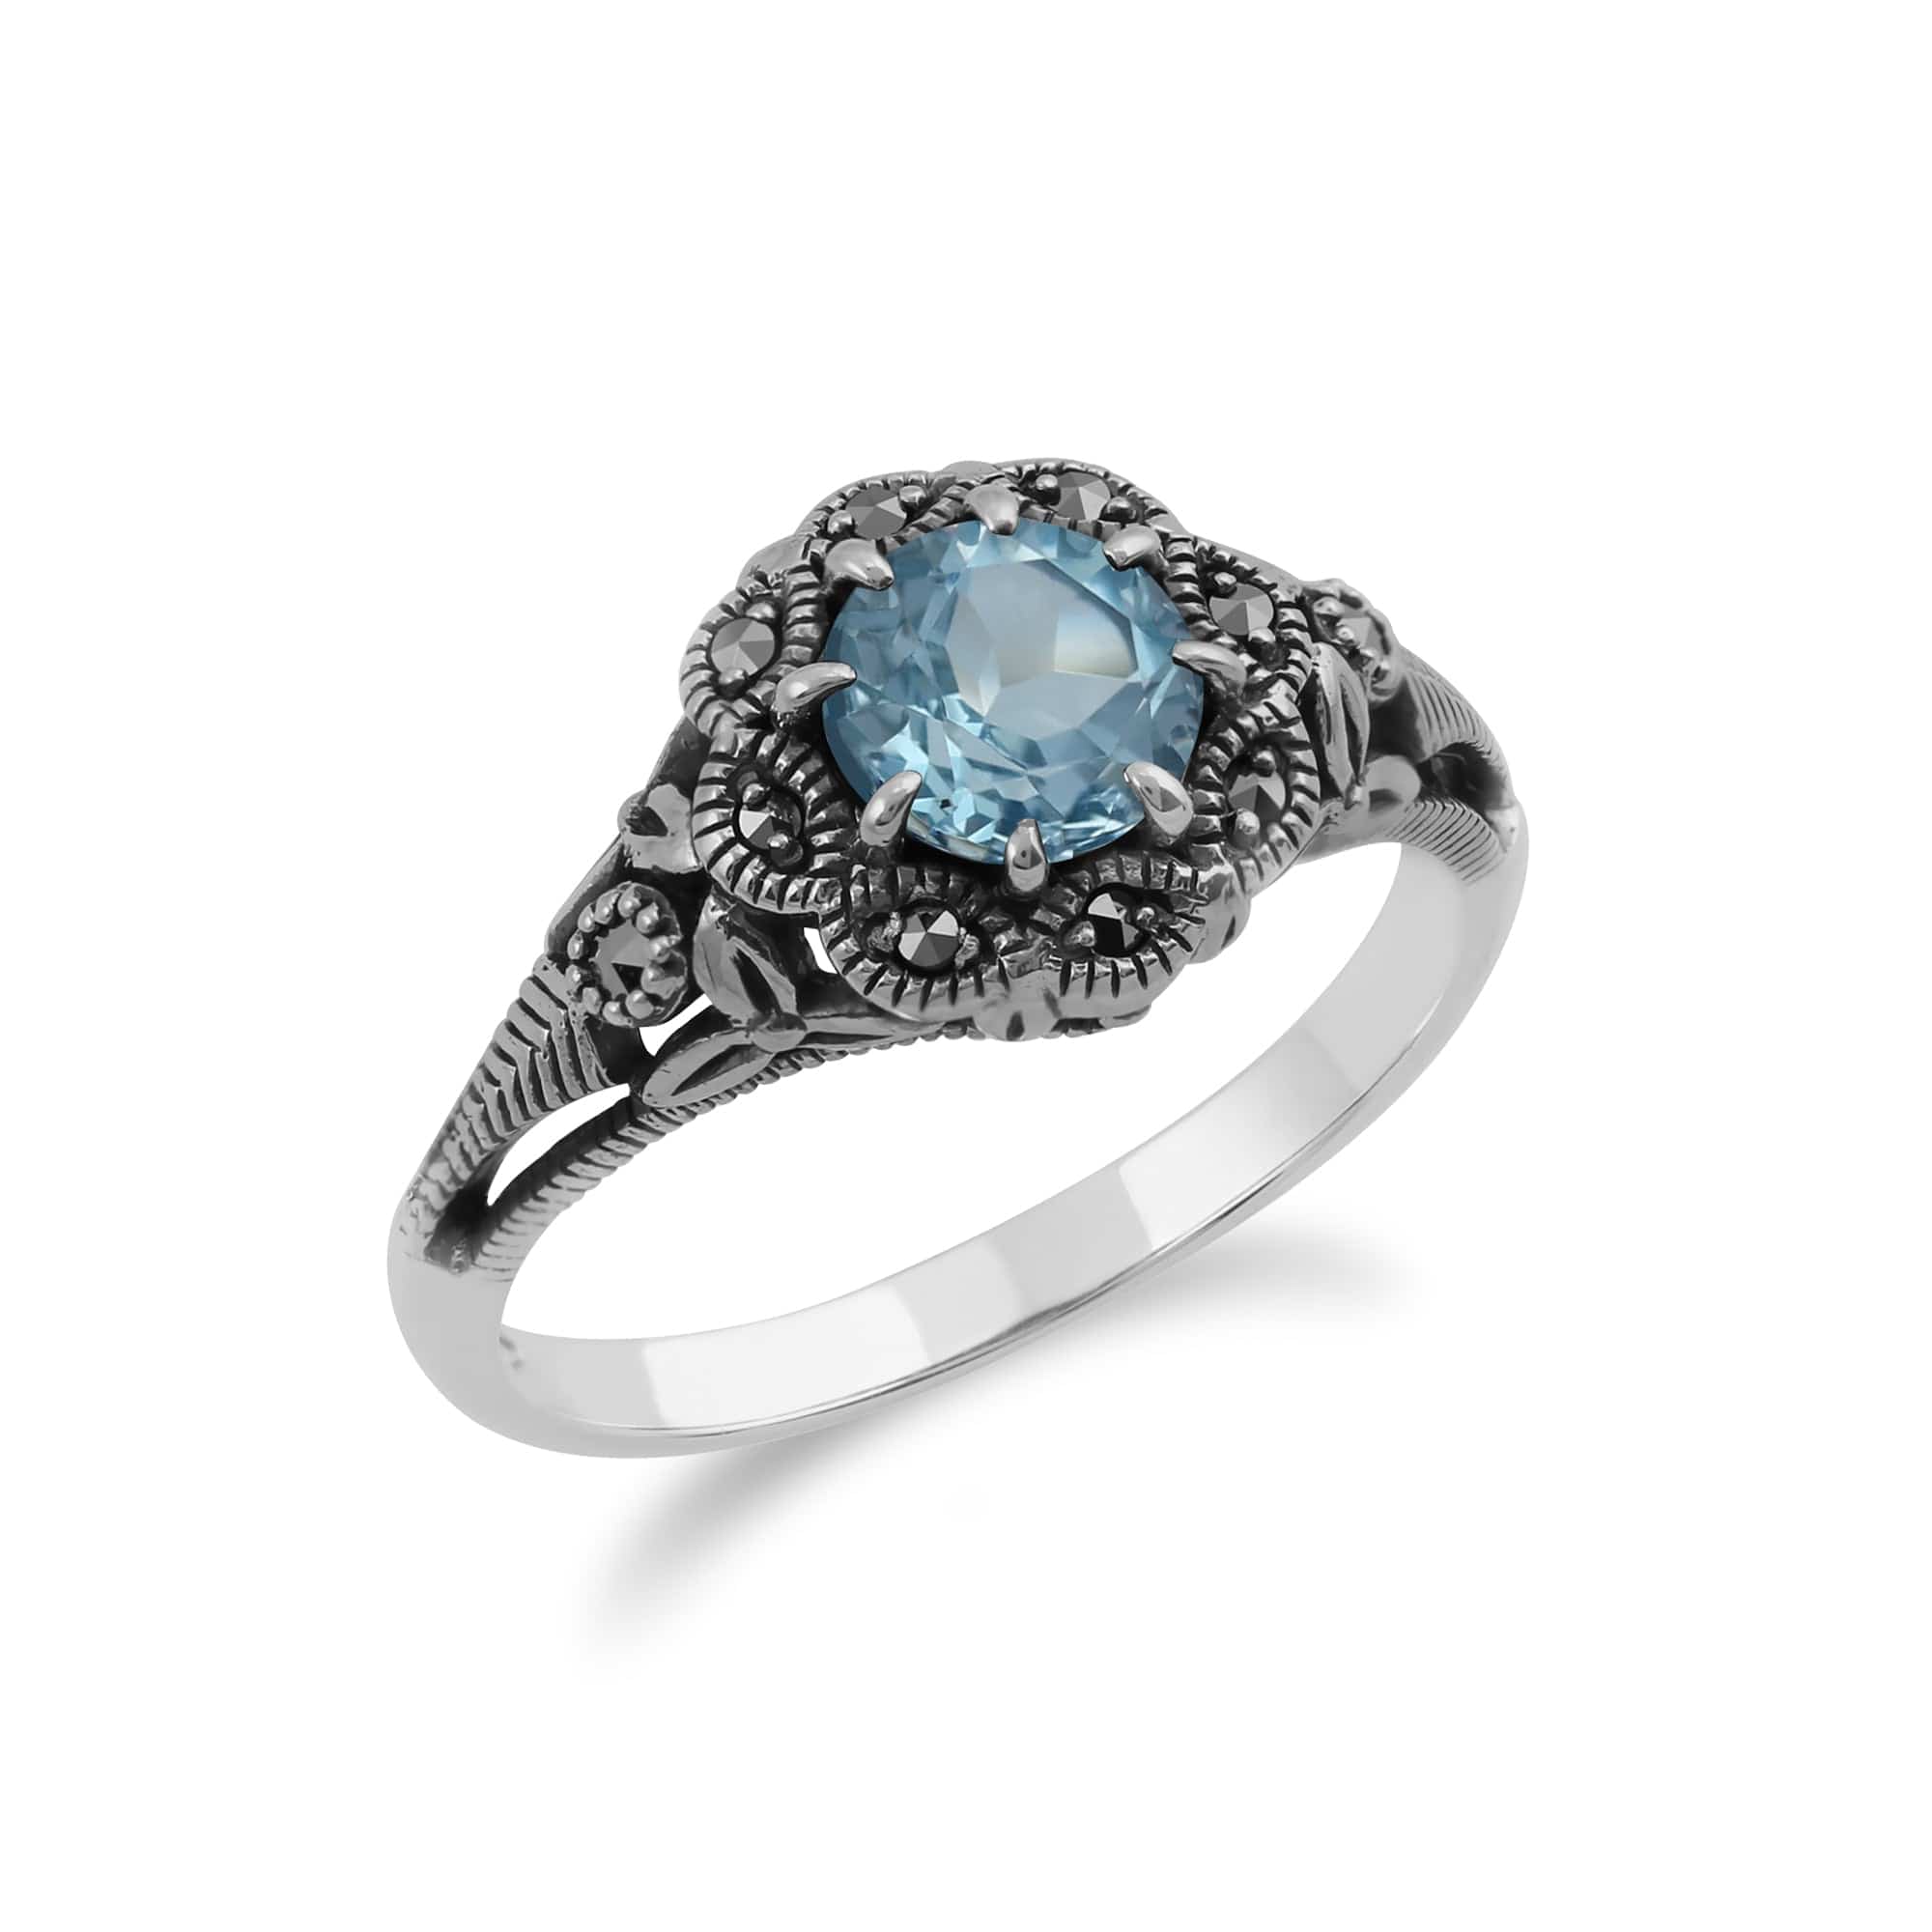 Art Nouveau Style Round Blue Topaz & Marcasite Floral Ring in Sterling Silver - Gemondo